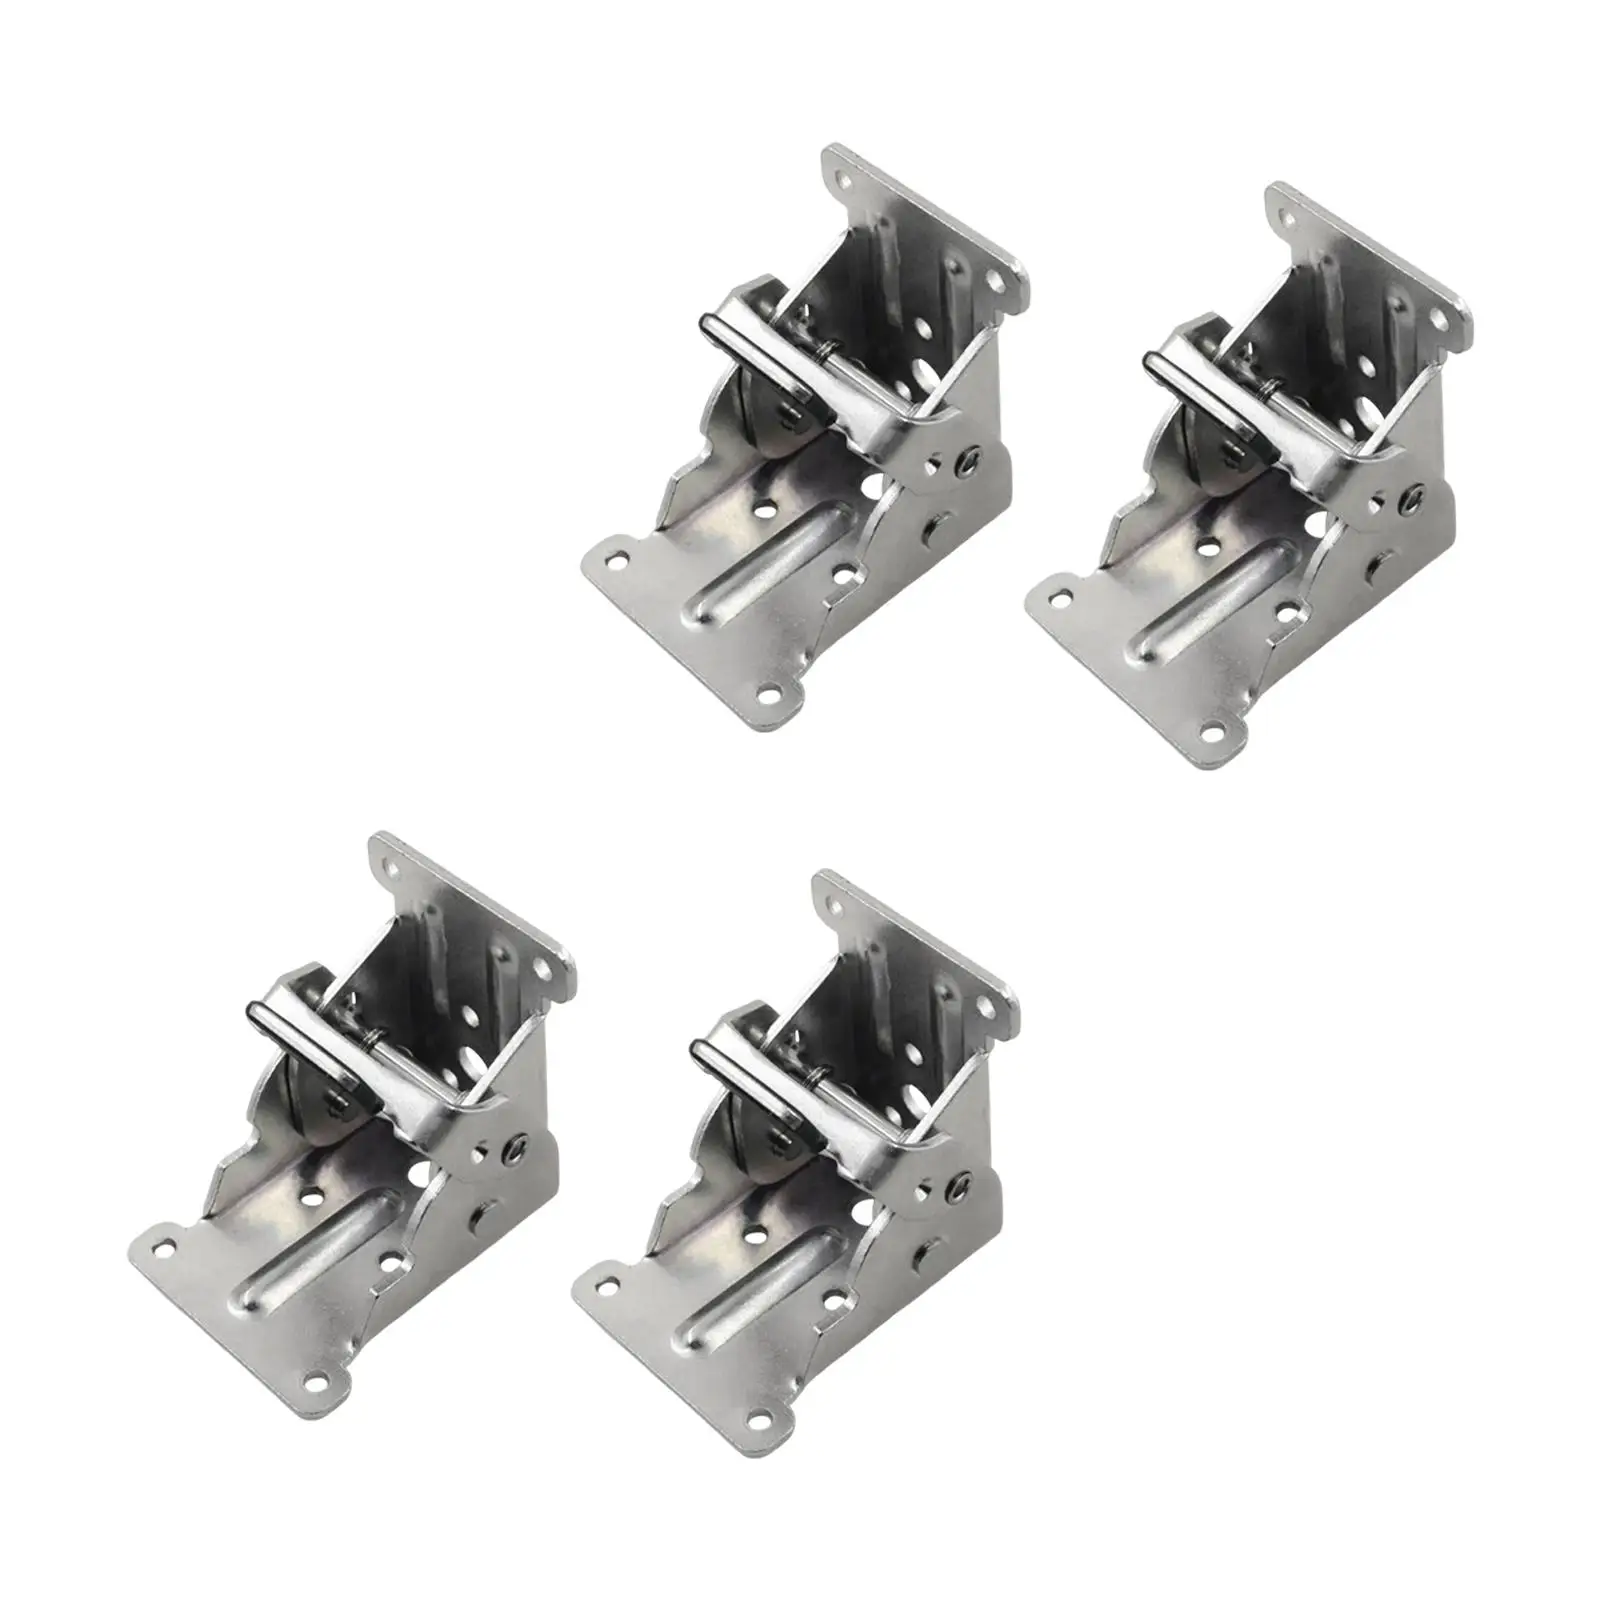 4Pcs Folding Hinges 90 Degree Accessories Metal Fittings for Chair Table Bed